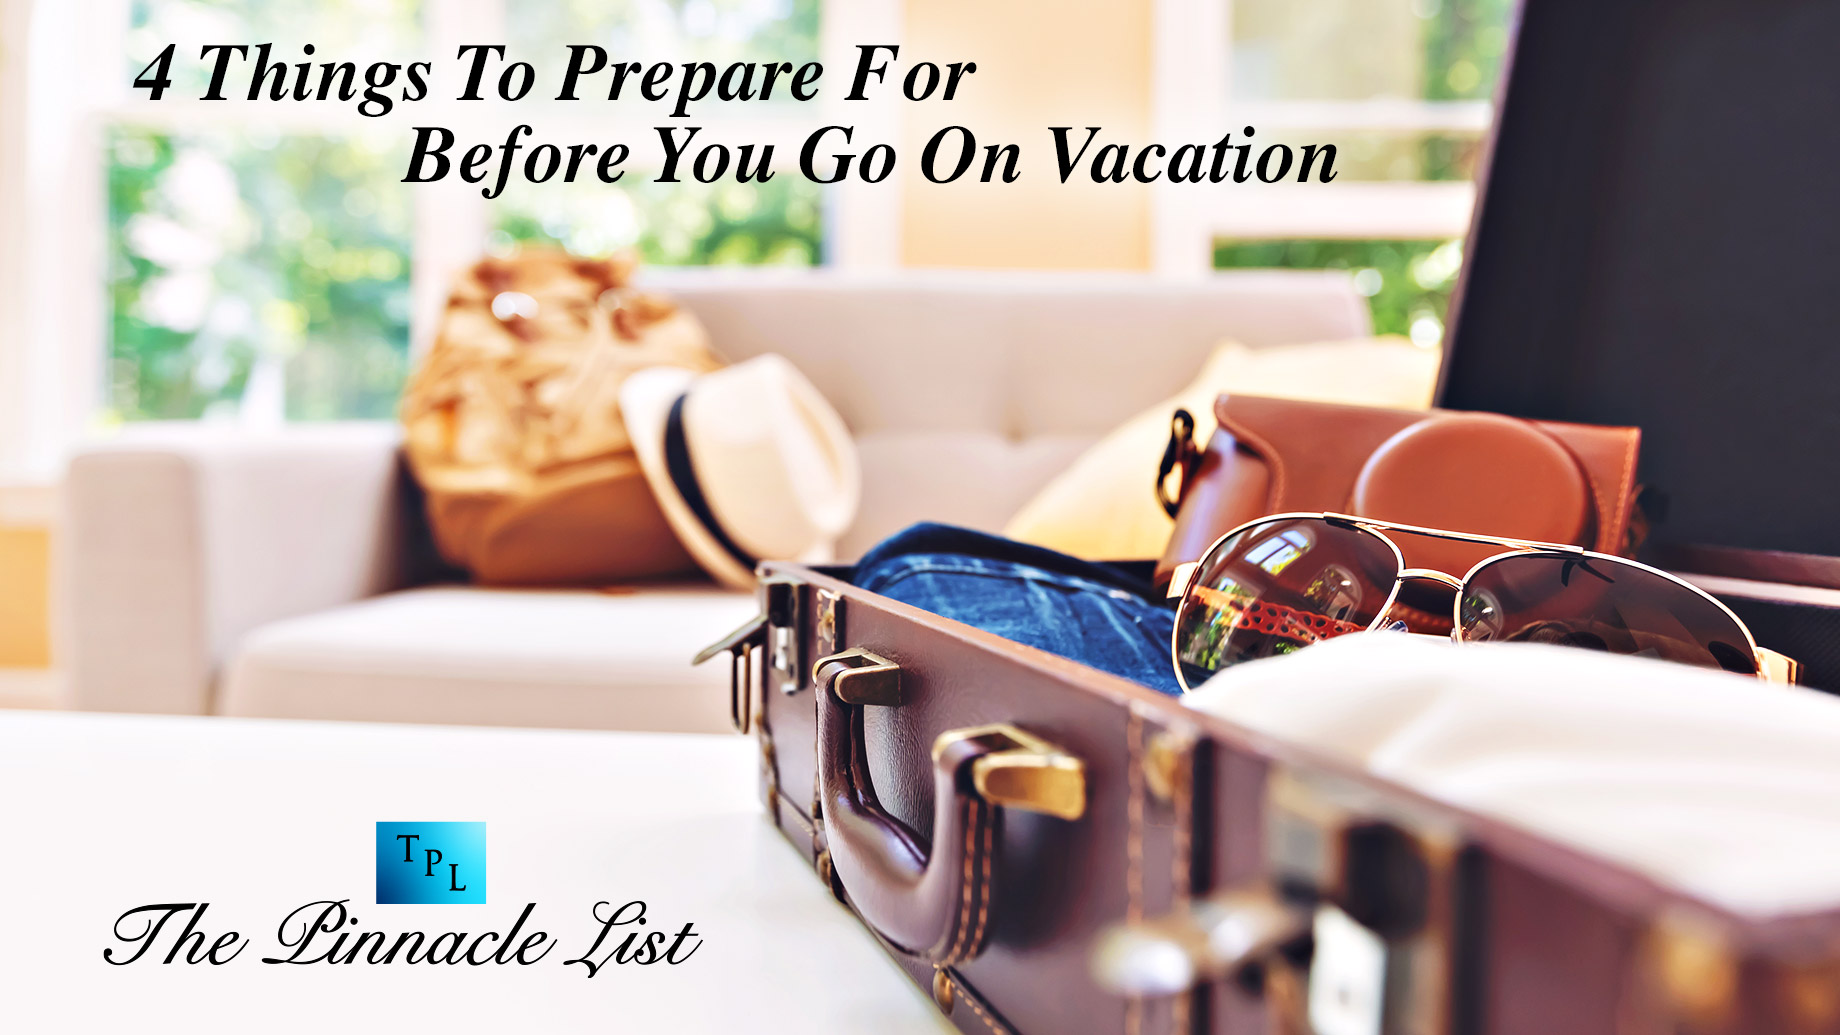 4 Things To Prepare For Before You Go On Vacation